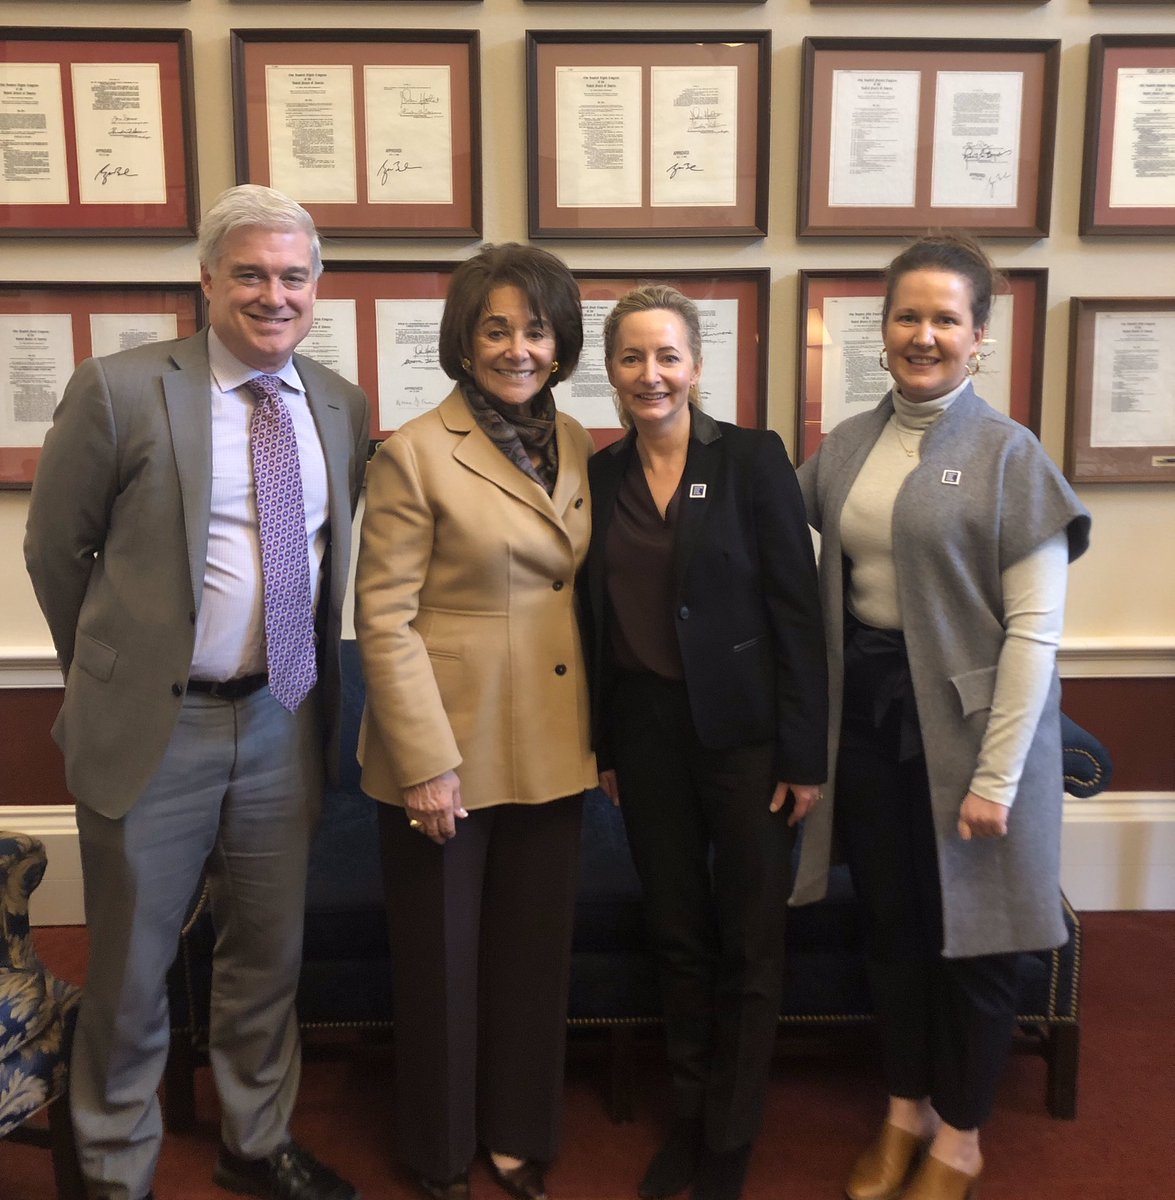 Congratulations @RepAnnaEshoo on the announcement of your retirement! Your support and being a champion for @PanCAN and everyone impacted by pancreatic cancer, has helped us come so far in the fight against this disease. From the bottom of my heart, thank you. 💜